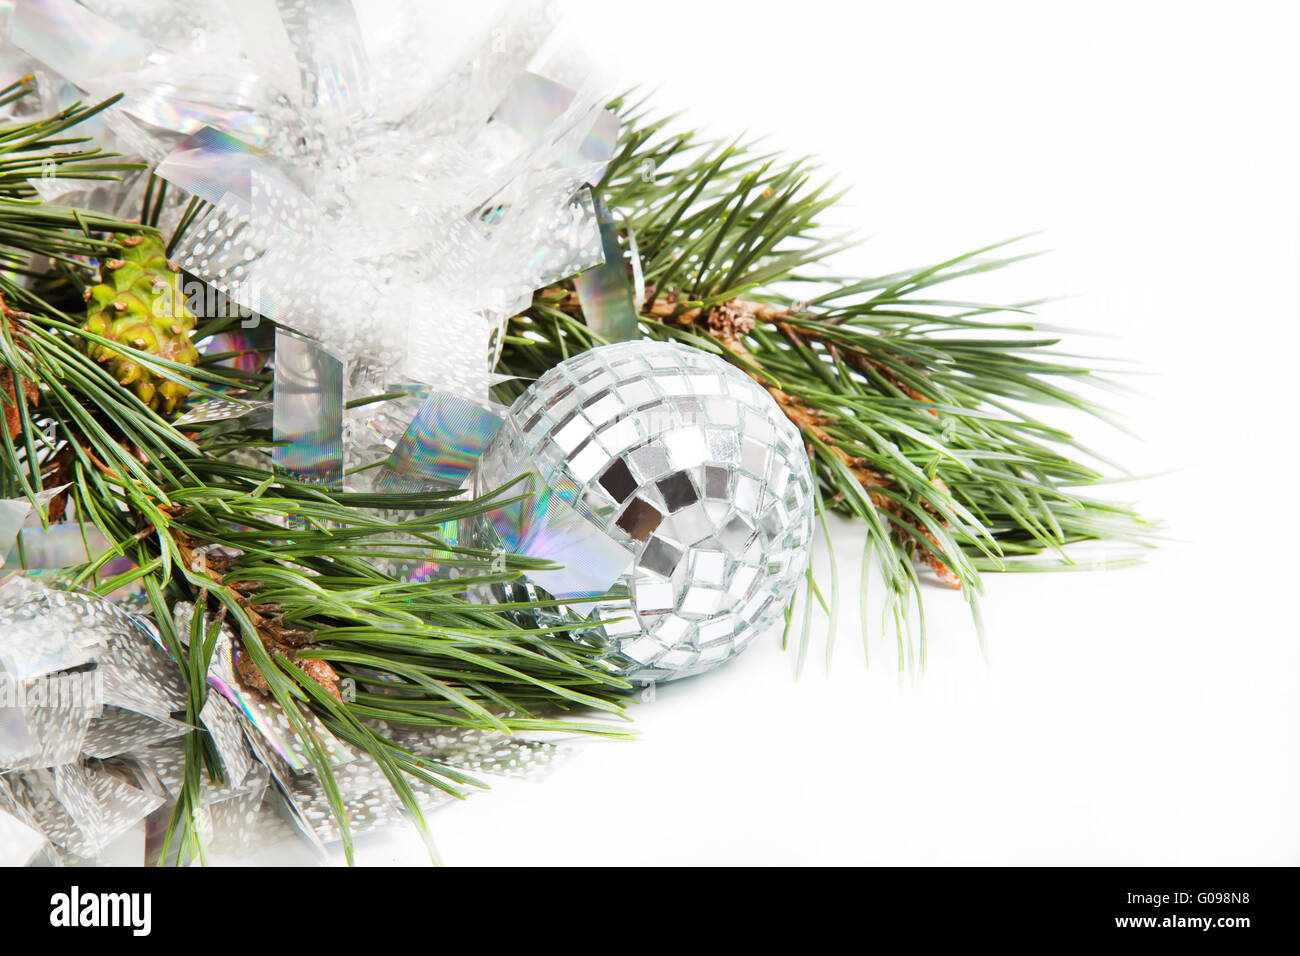 Fir tree branch with Christmas ball and shiny tinsel Stock Photo